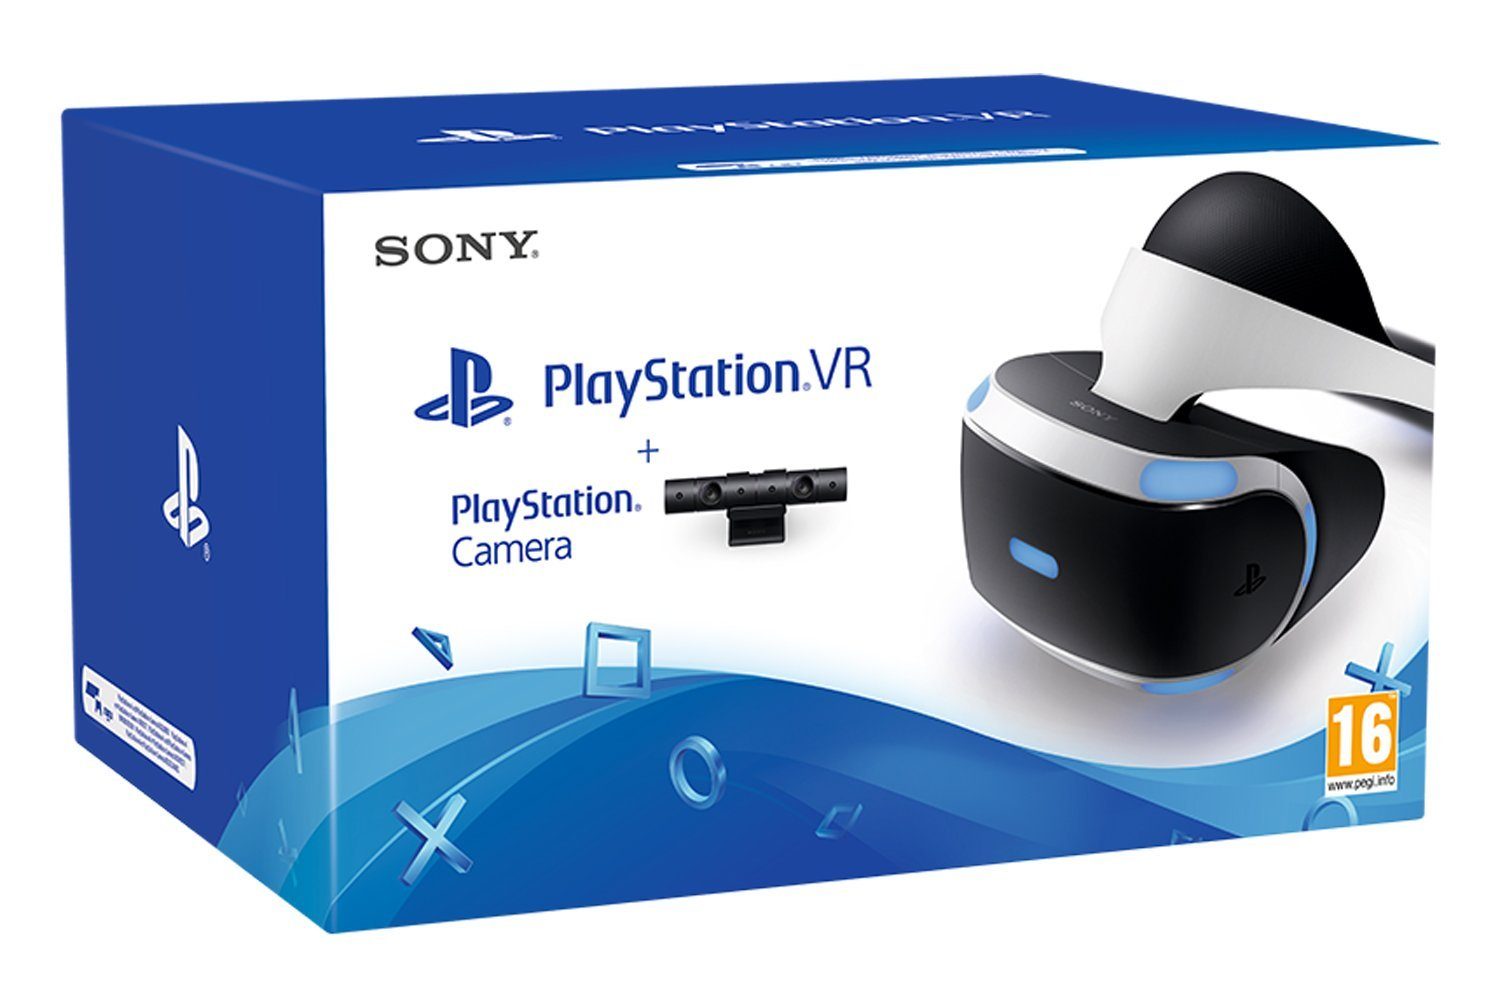 Baleen whale Interconnect Barren PlayStation VR All-in Bundle $50 Cheaper Thanks to 'Free' Tracking Camera –  Road to VR